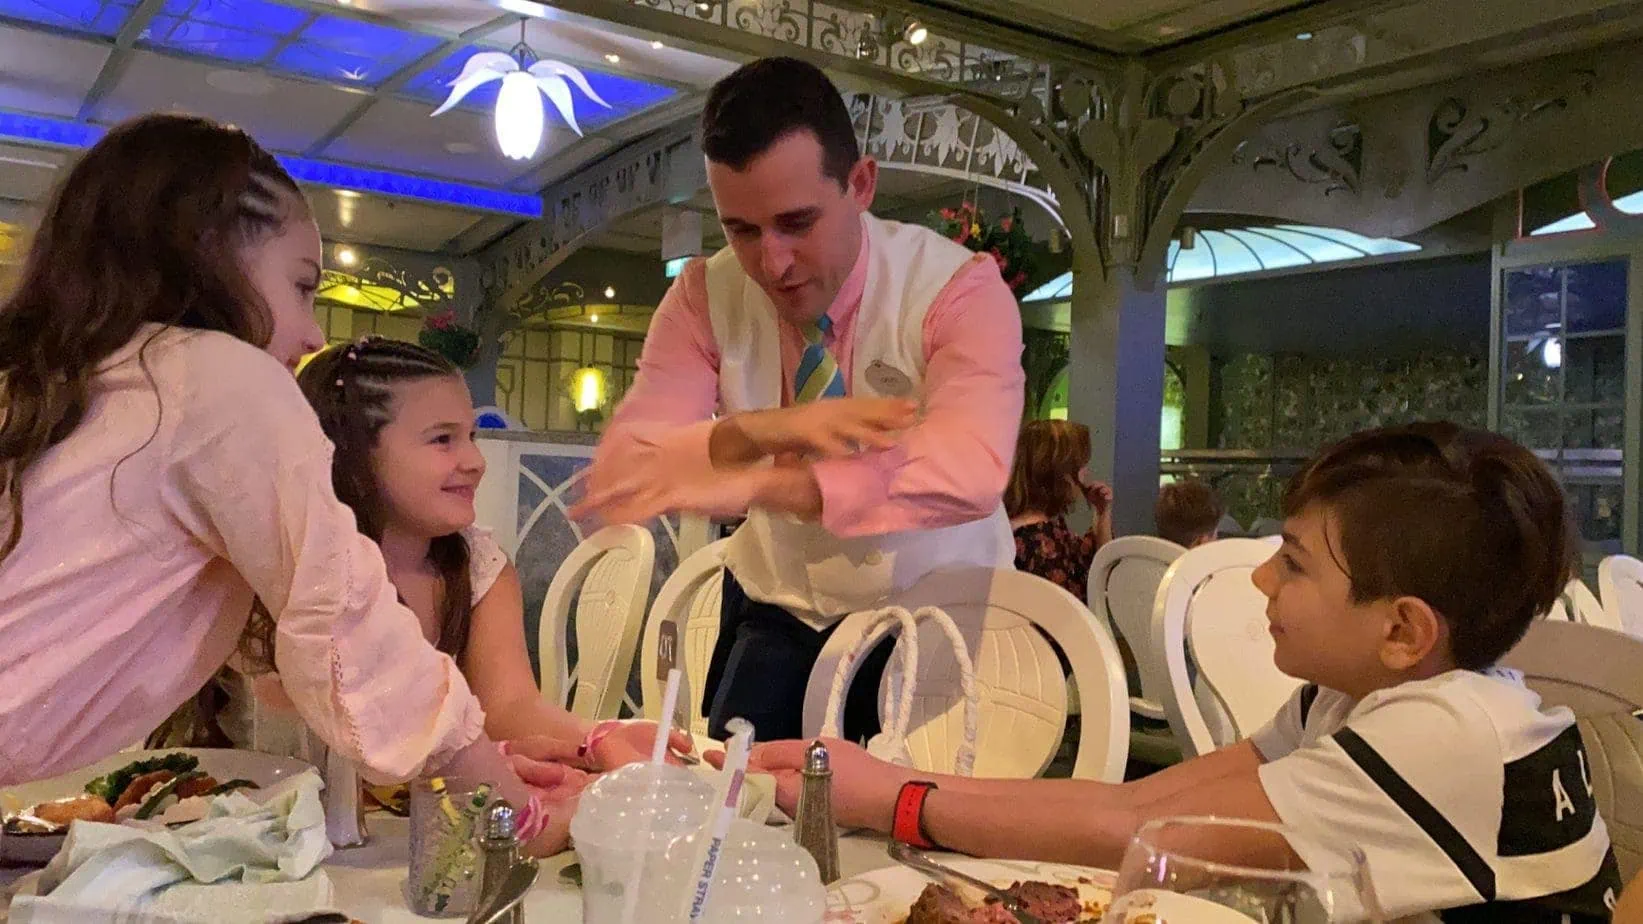 Waiter in white vest and pink shirt entertaining kids at a Disney Cruise restaurant 